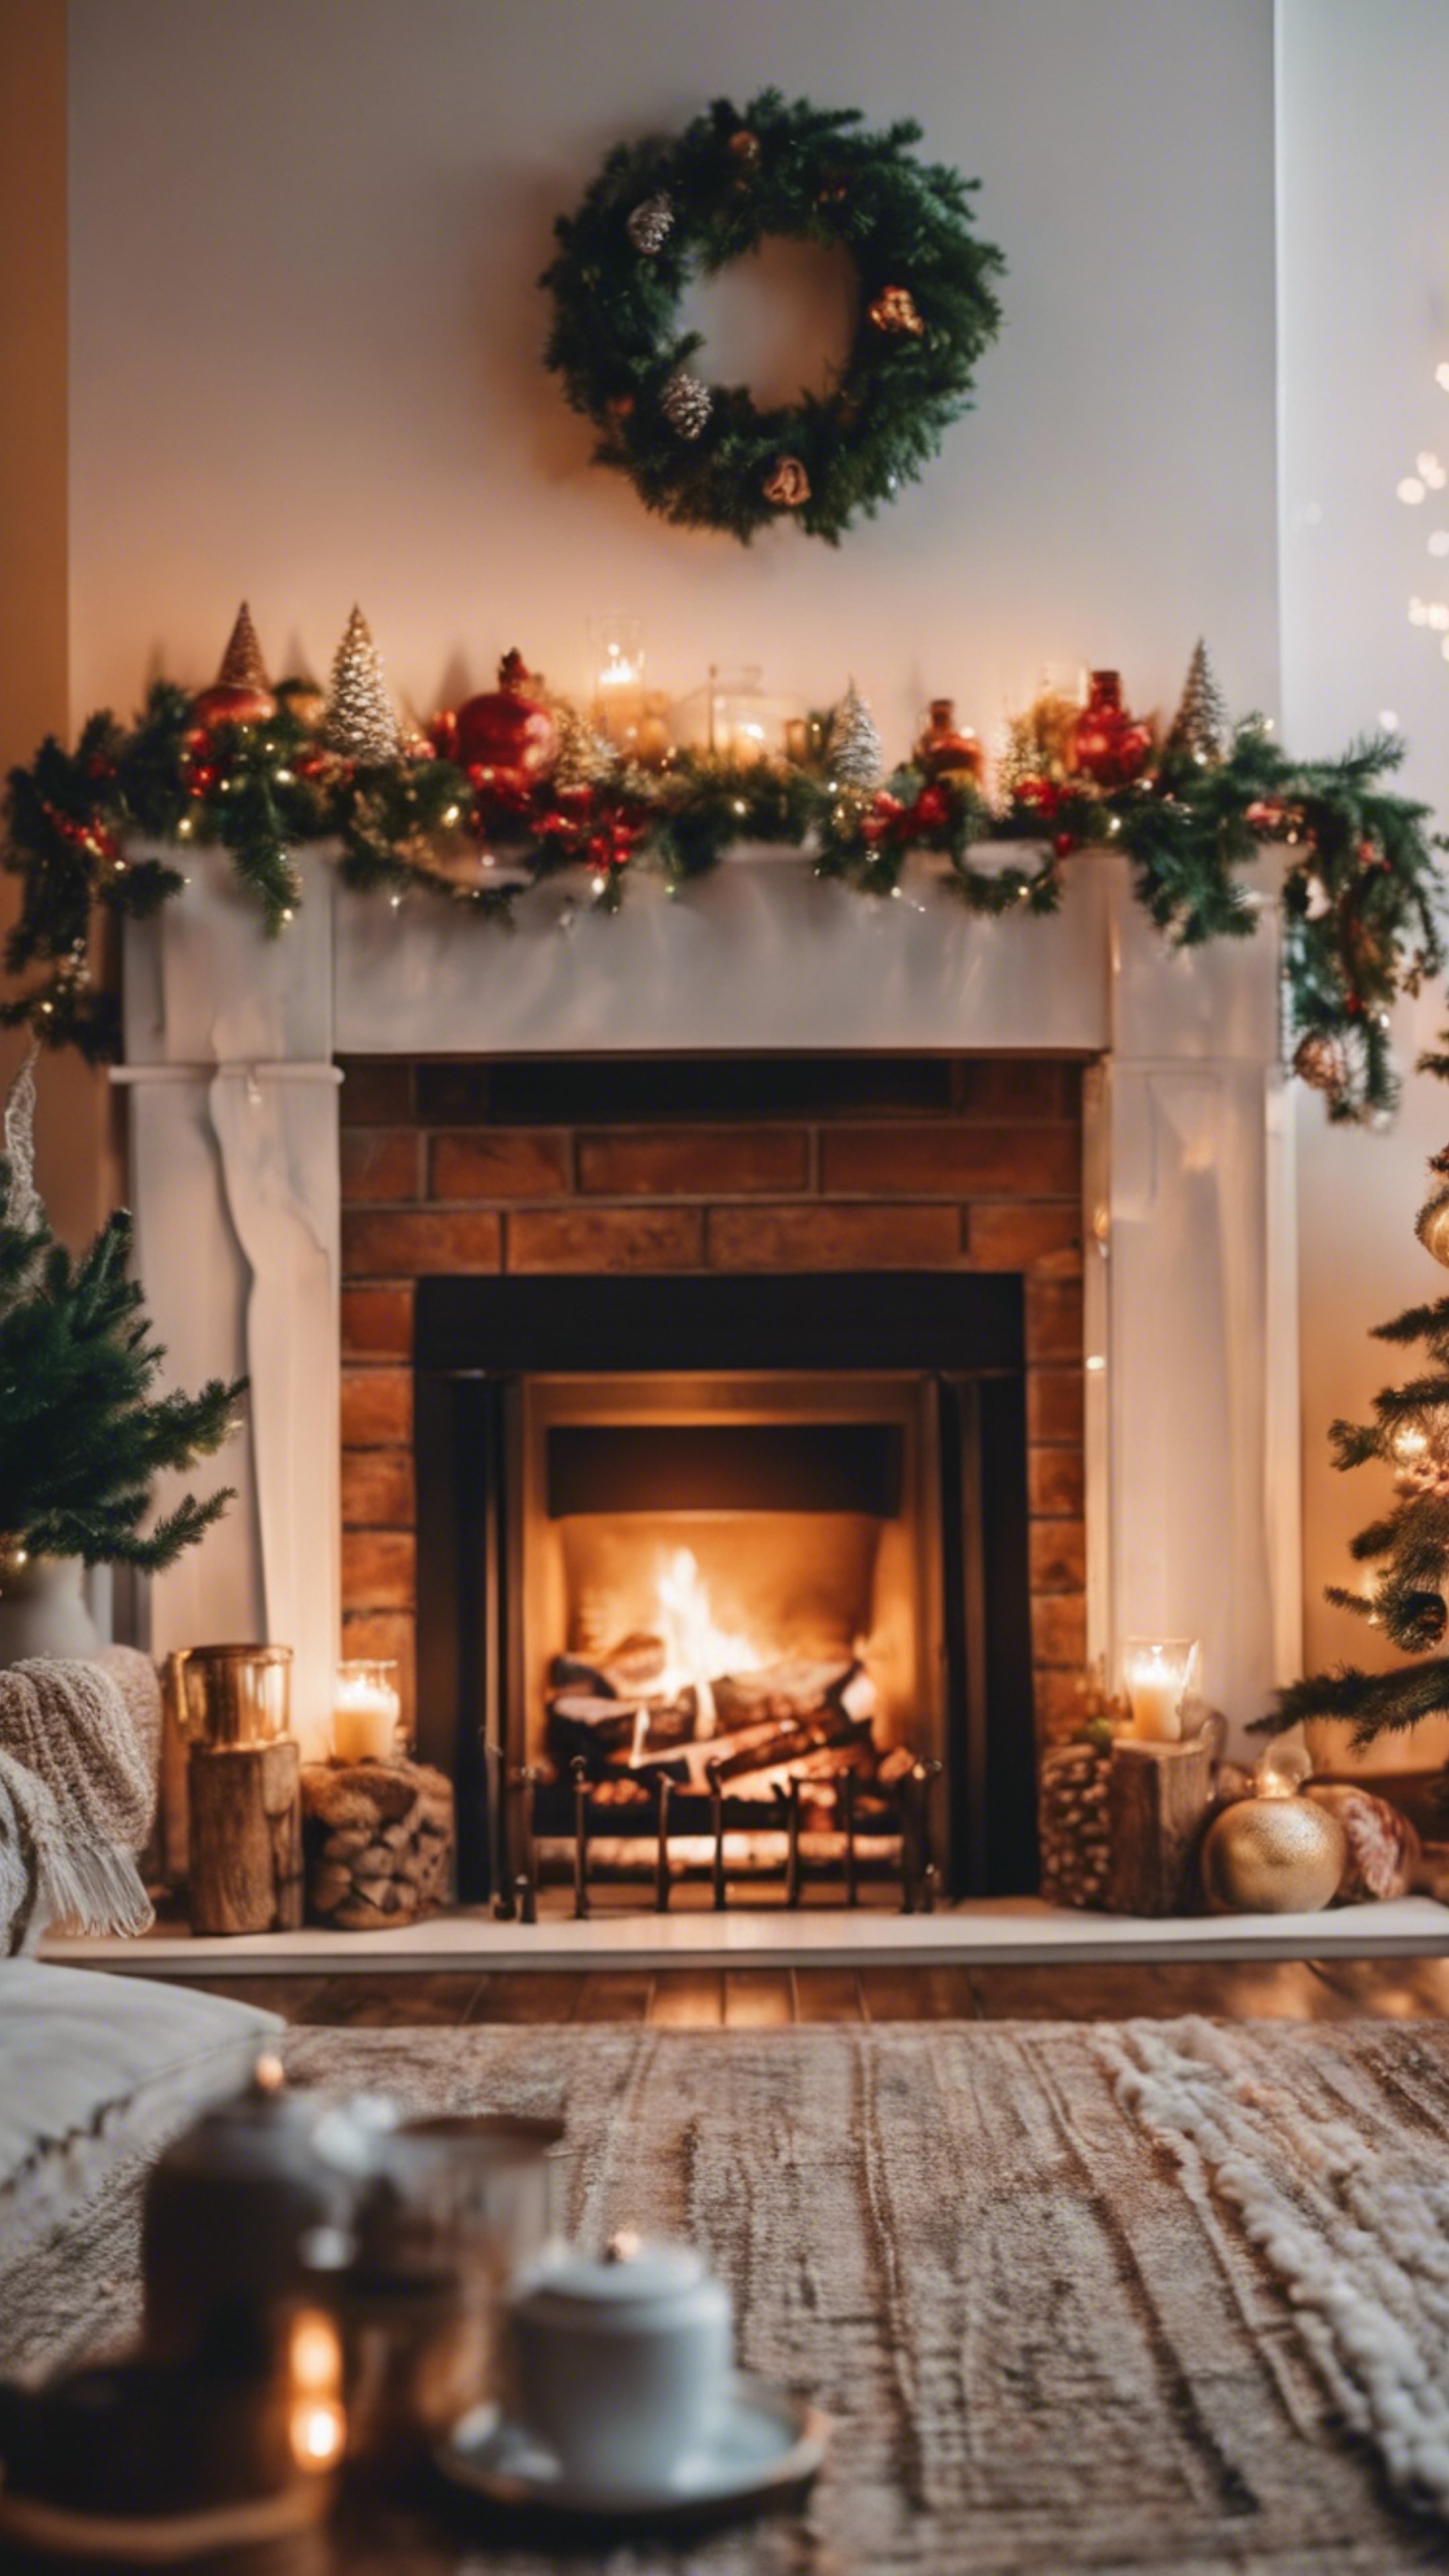 A cozy living room decorated for Christmas in boho style with a fireplace. Hình nền[2870ecc061ac4c6491a9]